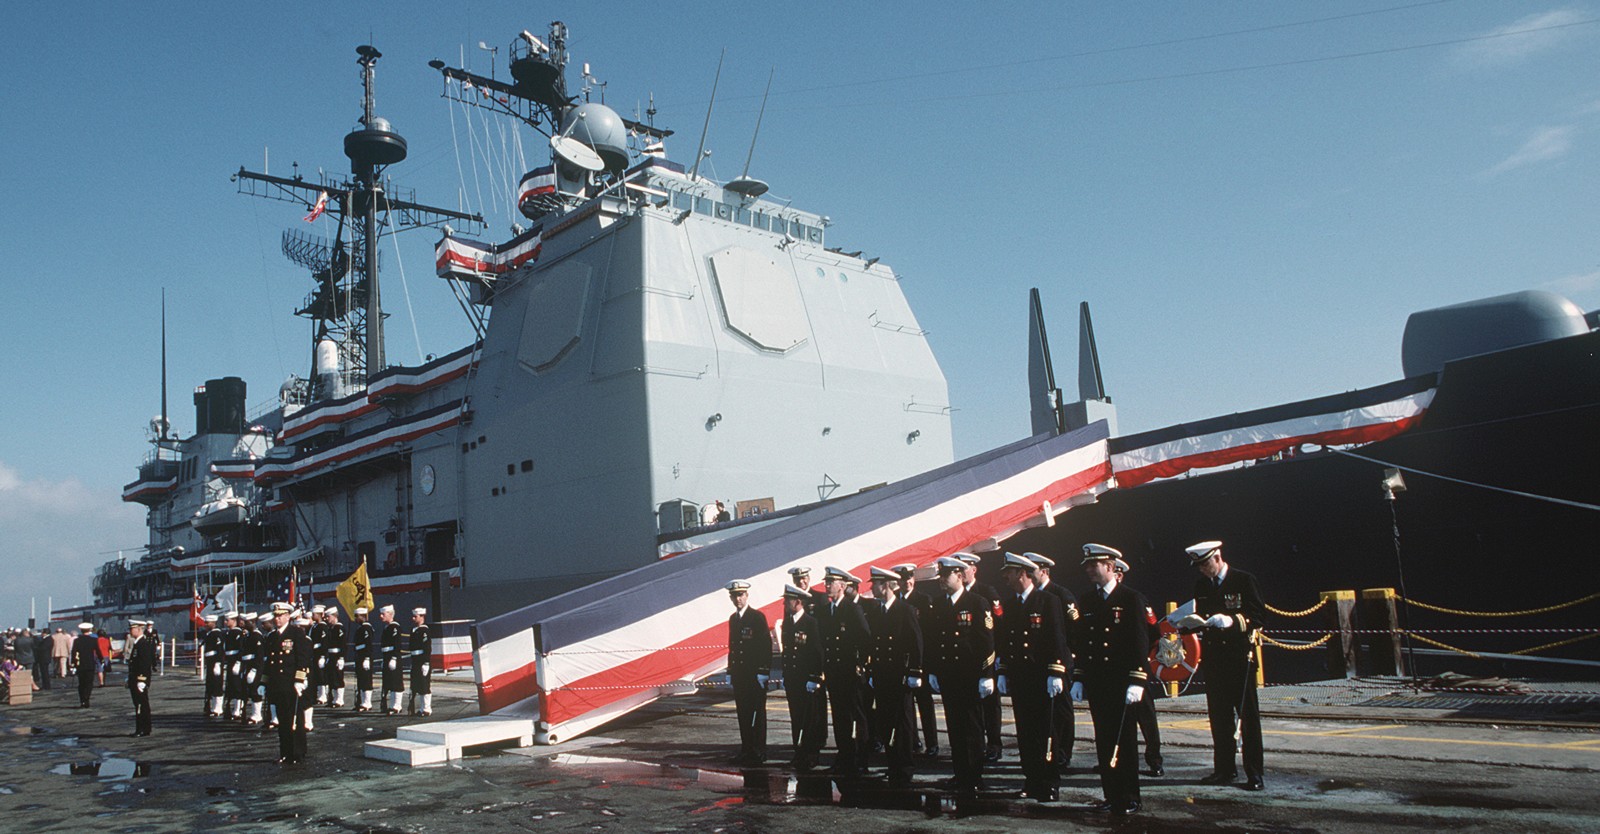 cg-50 uss valley forge ticonderoga class guided missile cruiser aegis us navy commissioning ceremony 23